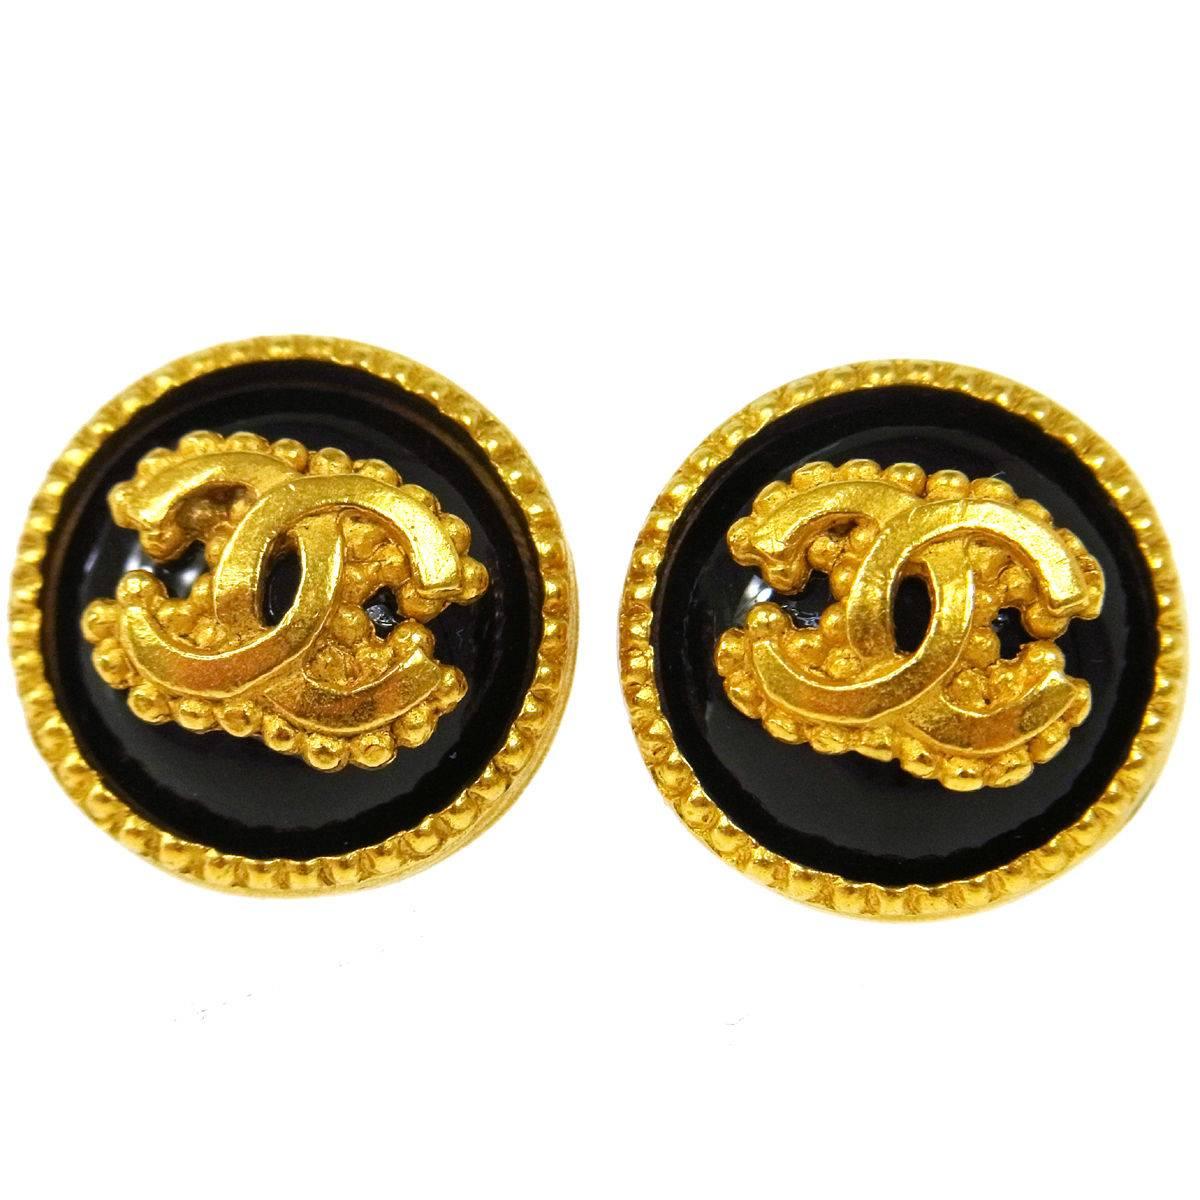 Chanel Textured Gold Black Accent Charm Statement Evening Stud Earrings